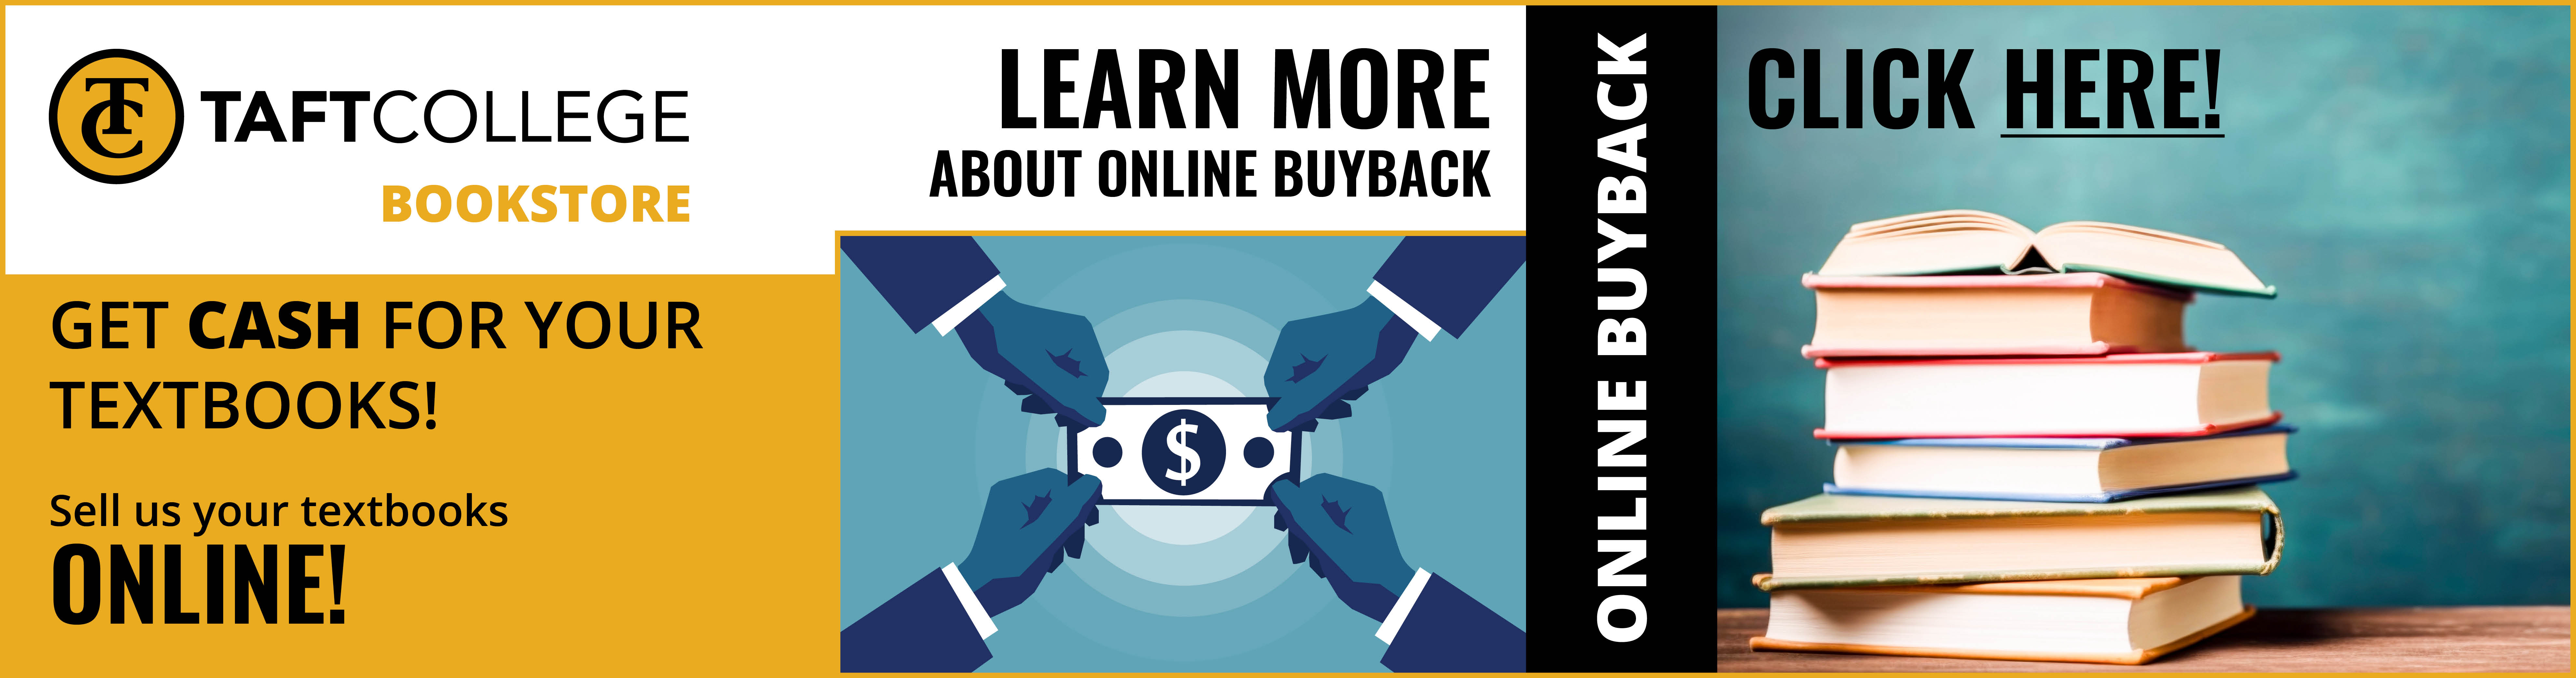 Learn more about online buyback. Click here.